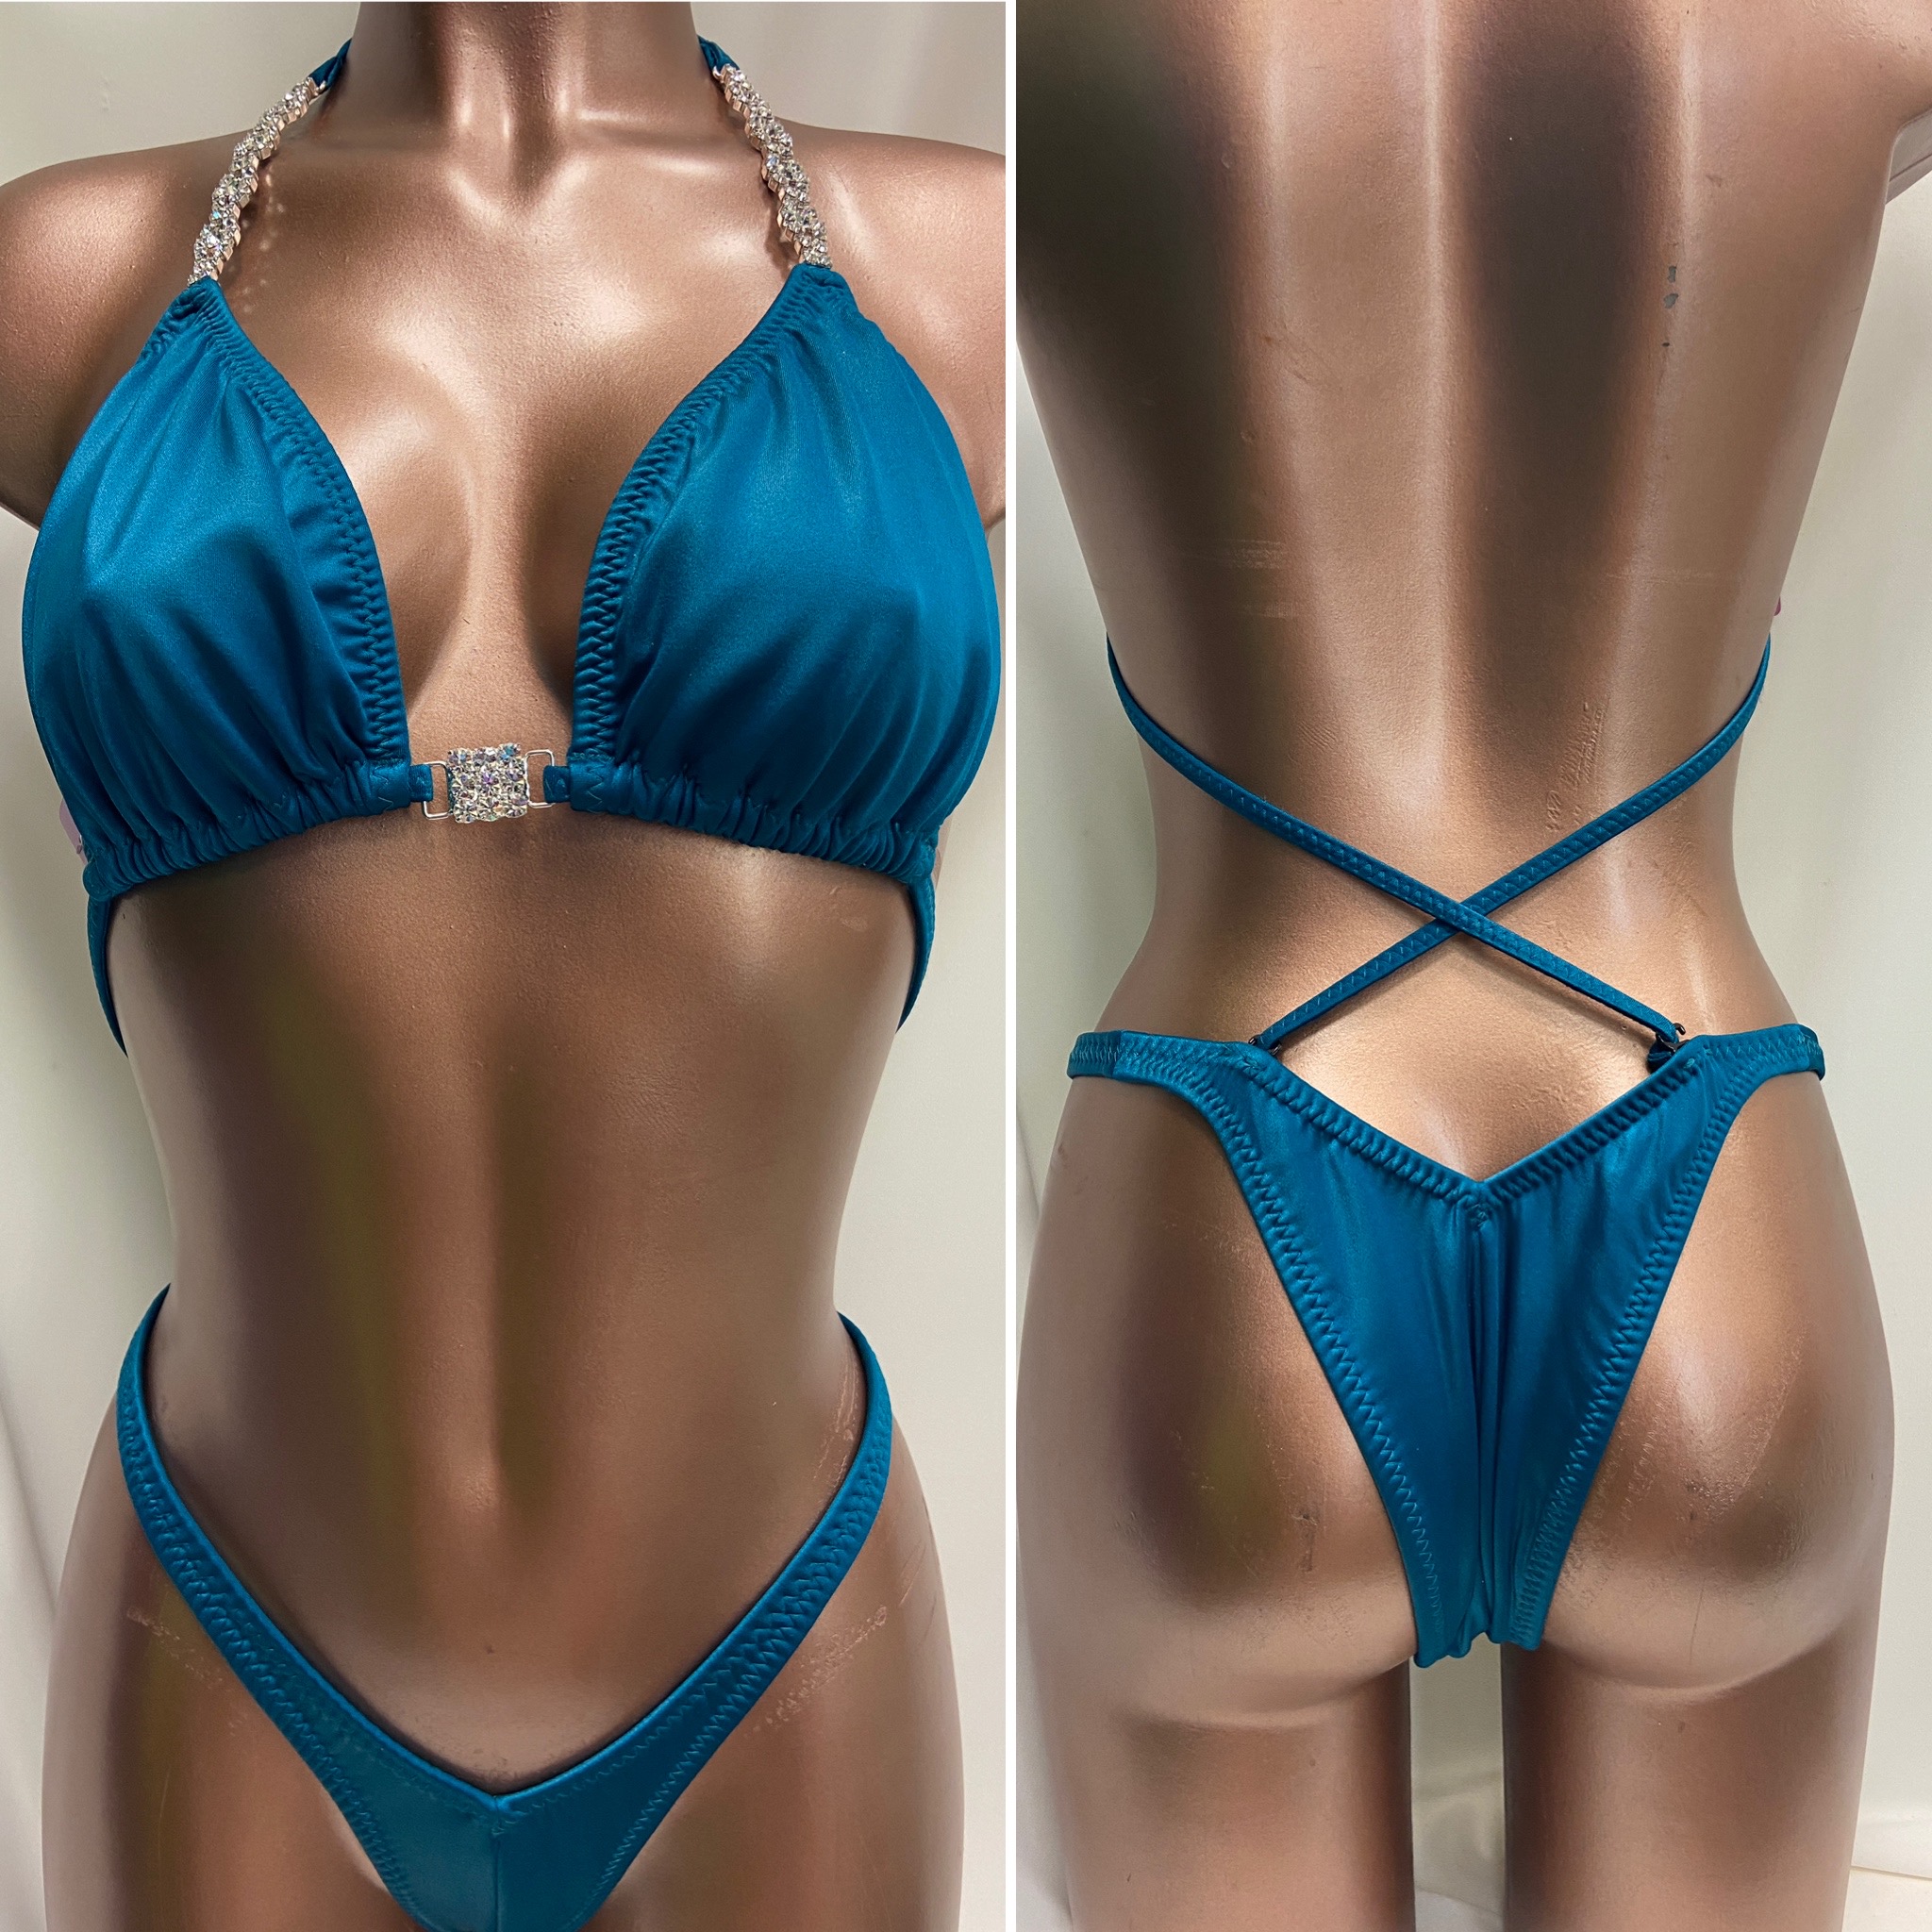 P9005 $125
D sliding top
small front , xsmall back 
teal wetlook with silver crystal connectors 